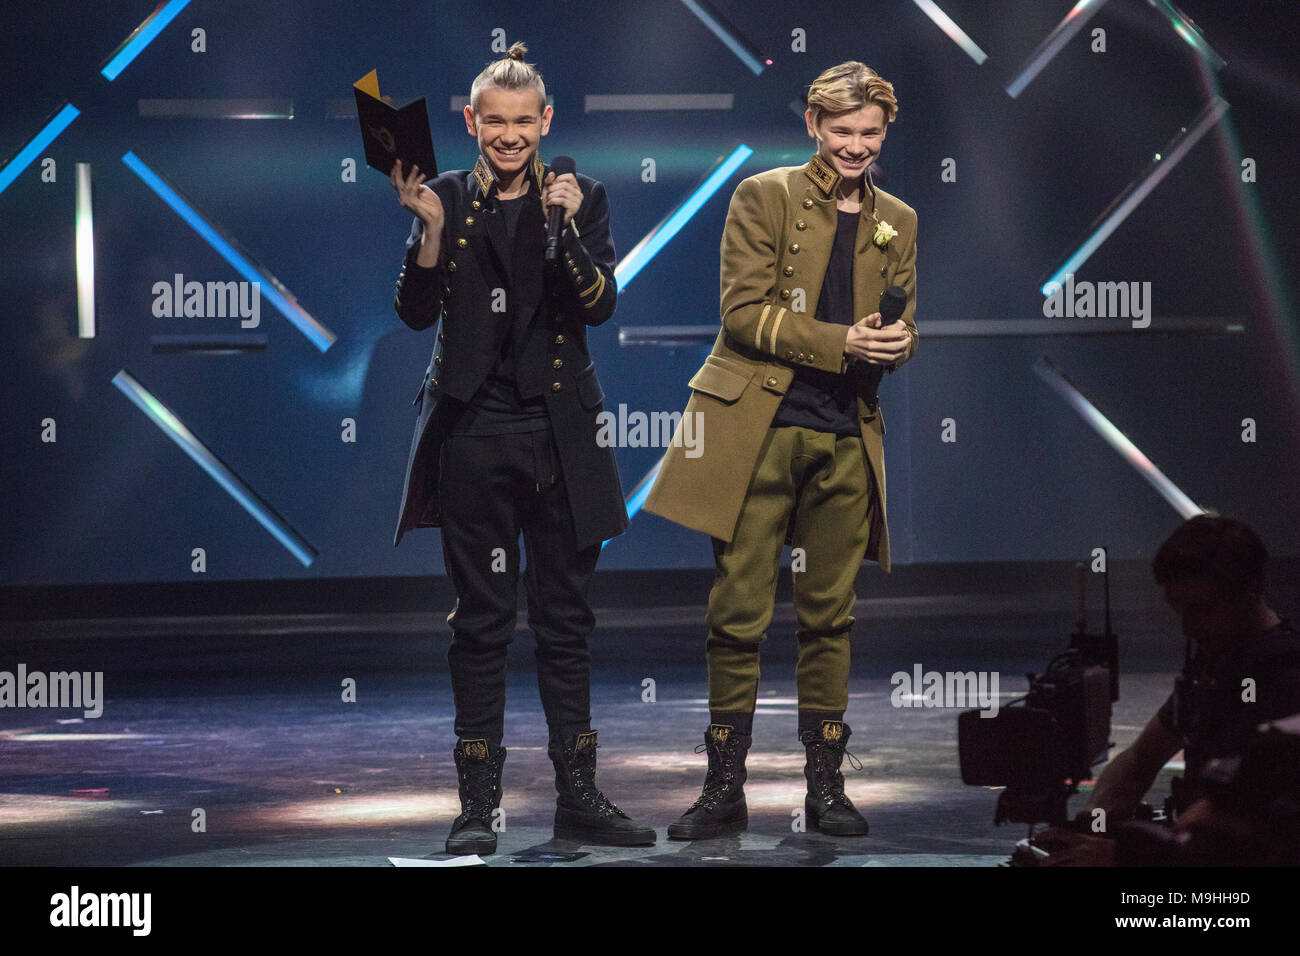 Norway, Oslo - February 25, 2018. The Norwegian pop icons and and twin brothers Marcus and Martinus present an award during the Norwegian Grammy Awards, Spellemannprisen 2017, at Oslo Konserthus in Oslo. (Photo credit: Gonzales Photo - Stian S. Moller). Stock Photo